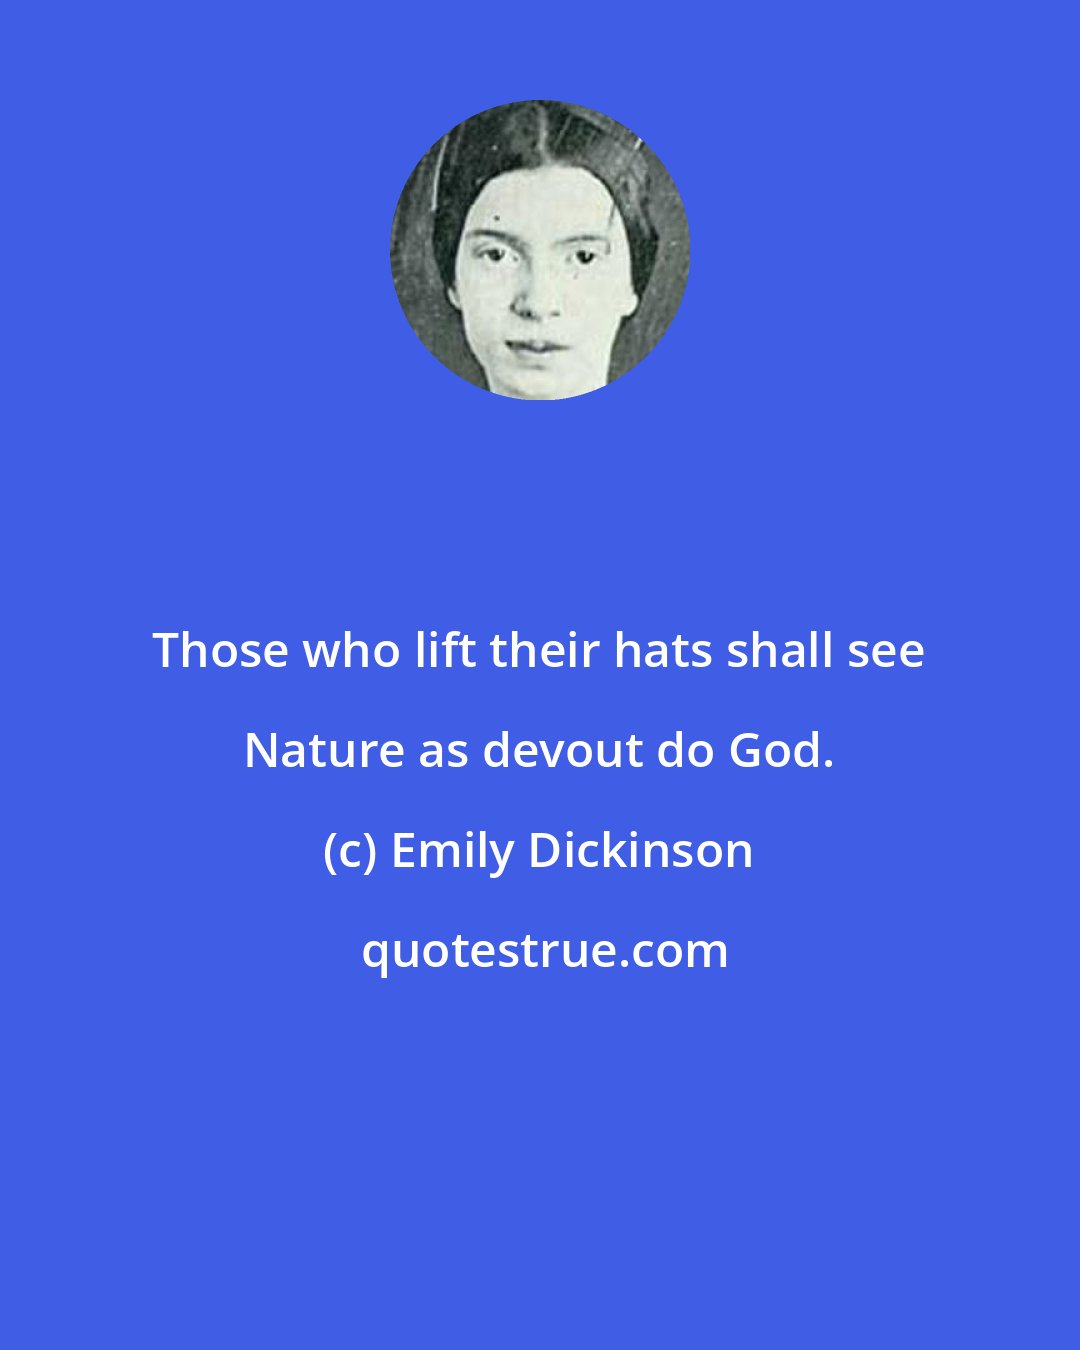 Emily Dickinson: Those who lift their hats shall see Nature as devout do God.